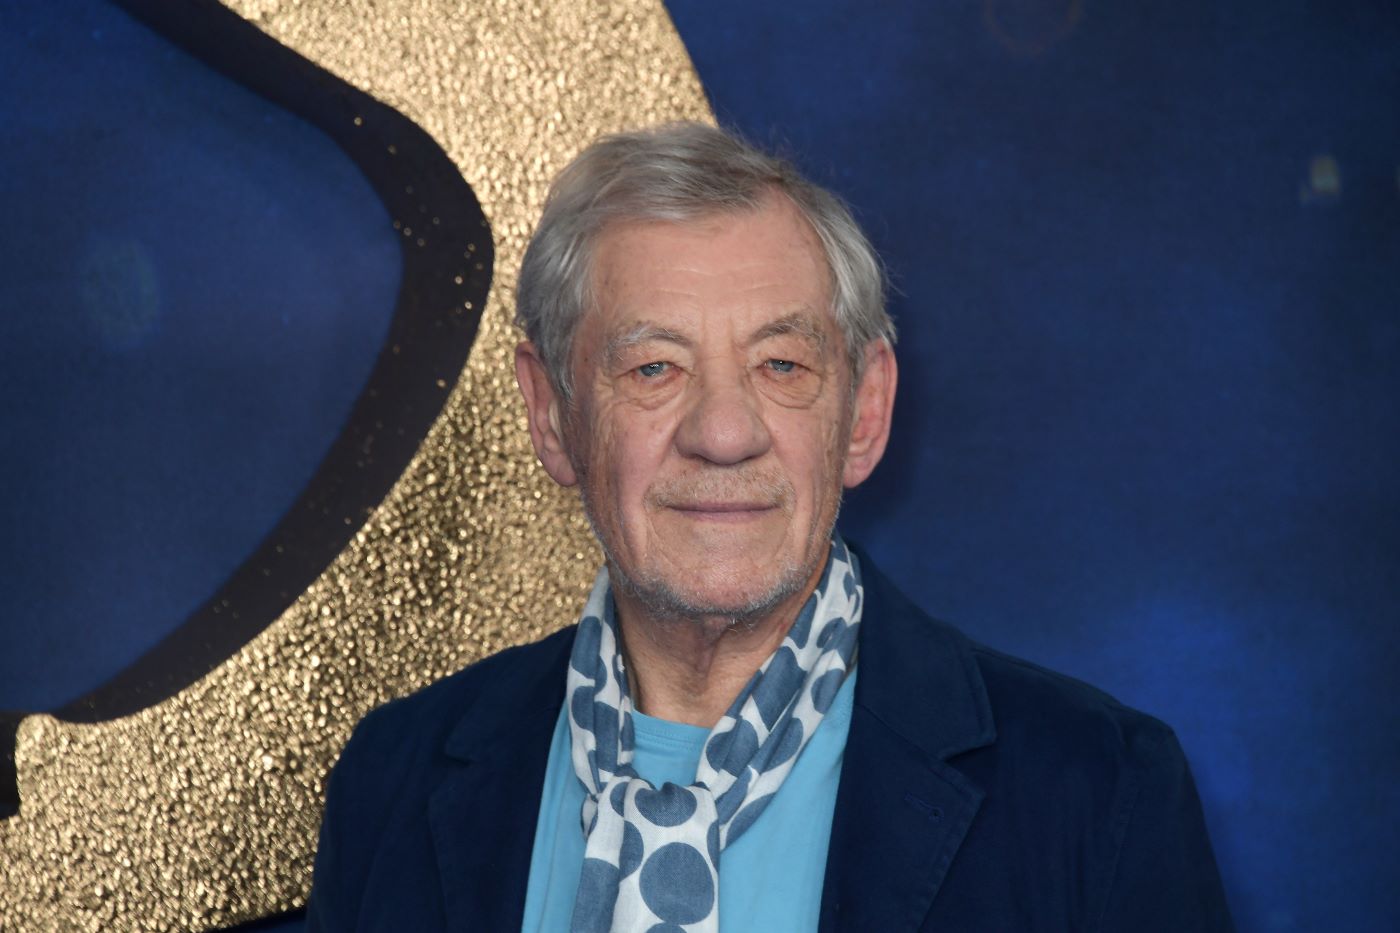 Sir Ian McKellen wearing a blue undershirt with a dark blue jacket and a white and teal ascot tie in front of a dark blue and gold background.